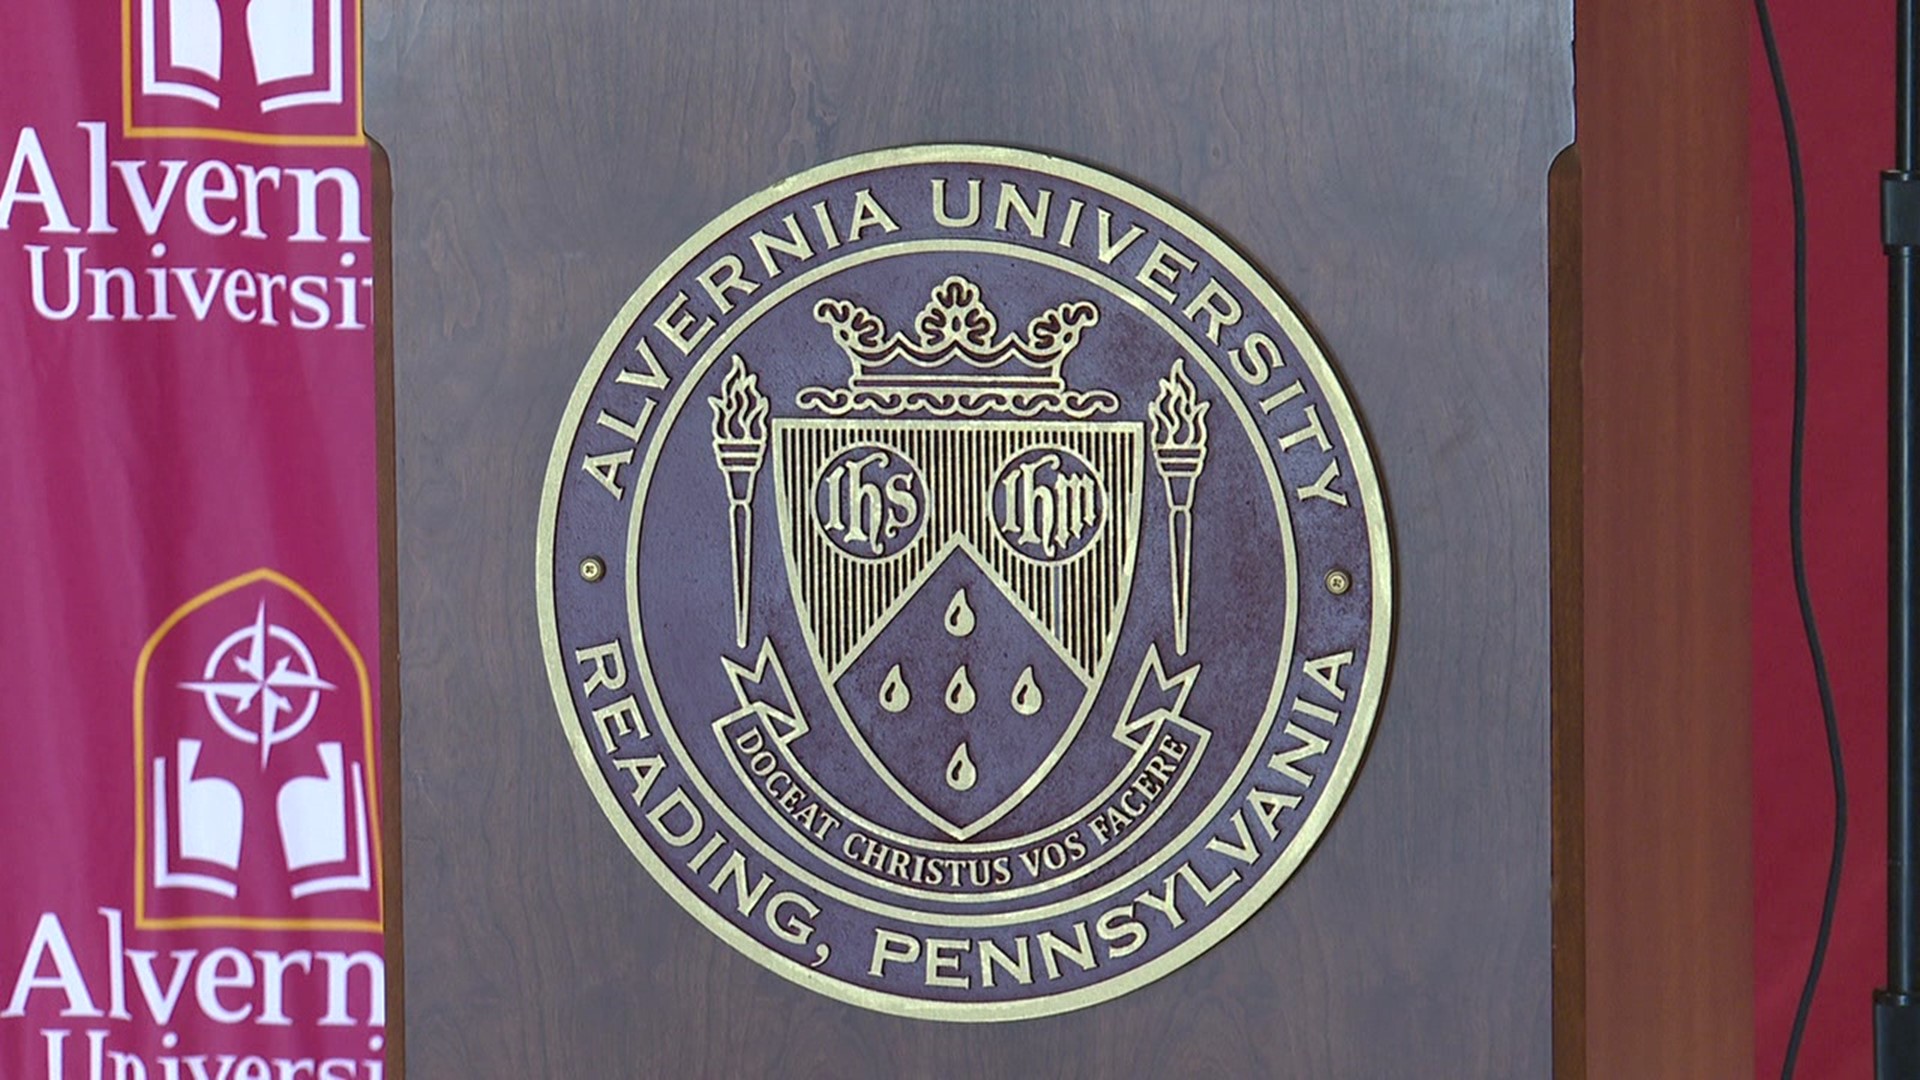 It's been a year and a half since the Giant store in Pottsville shut down. Officials gathered Thursday to begin the transition into a campus of Alvernia University.